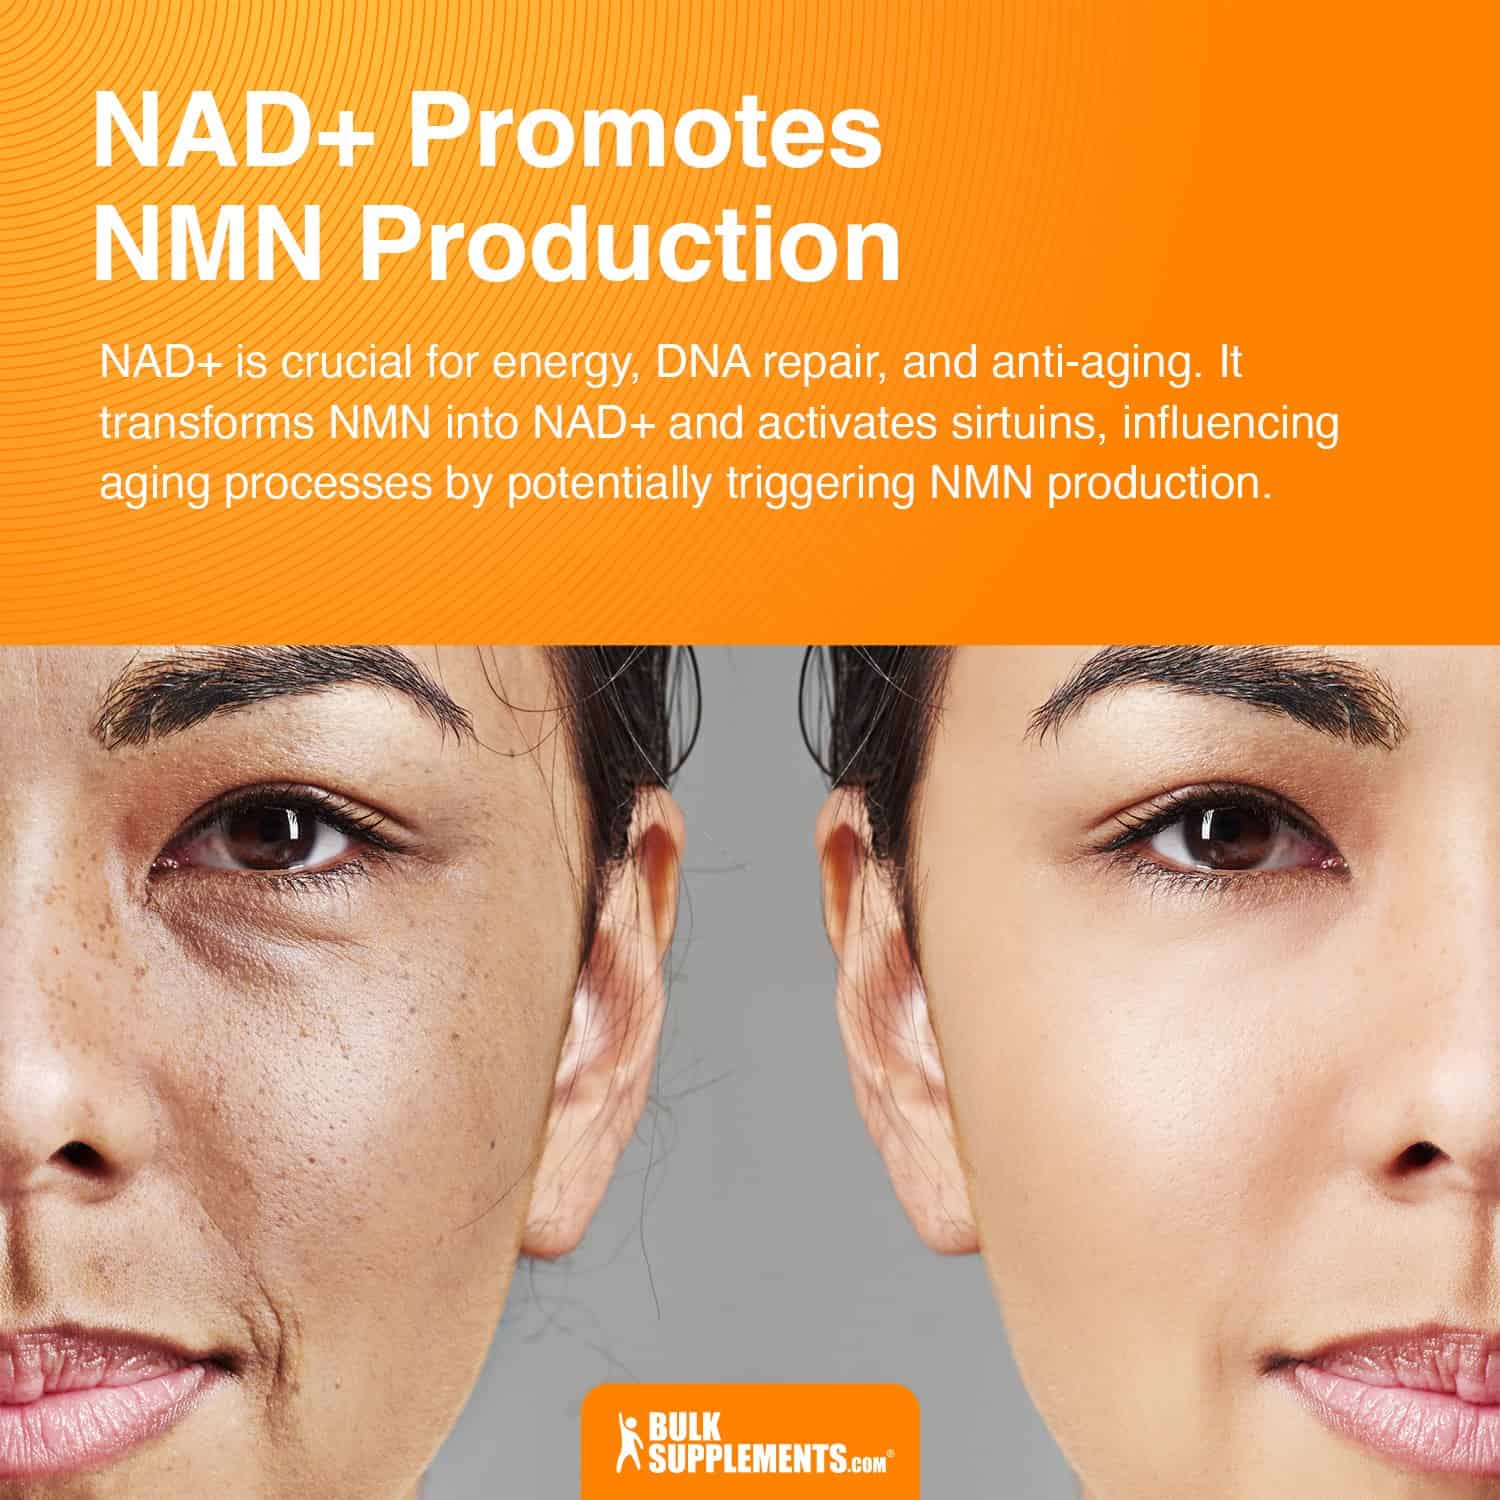 nad+ promotes nmn production